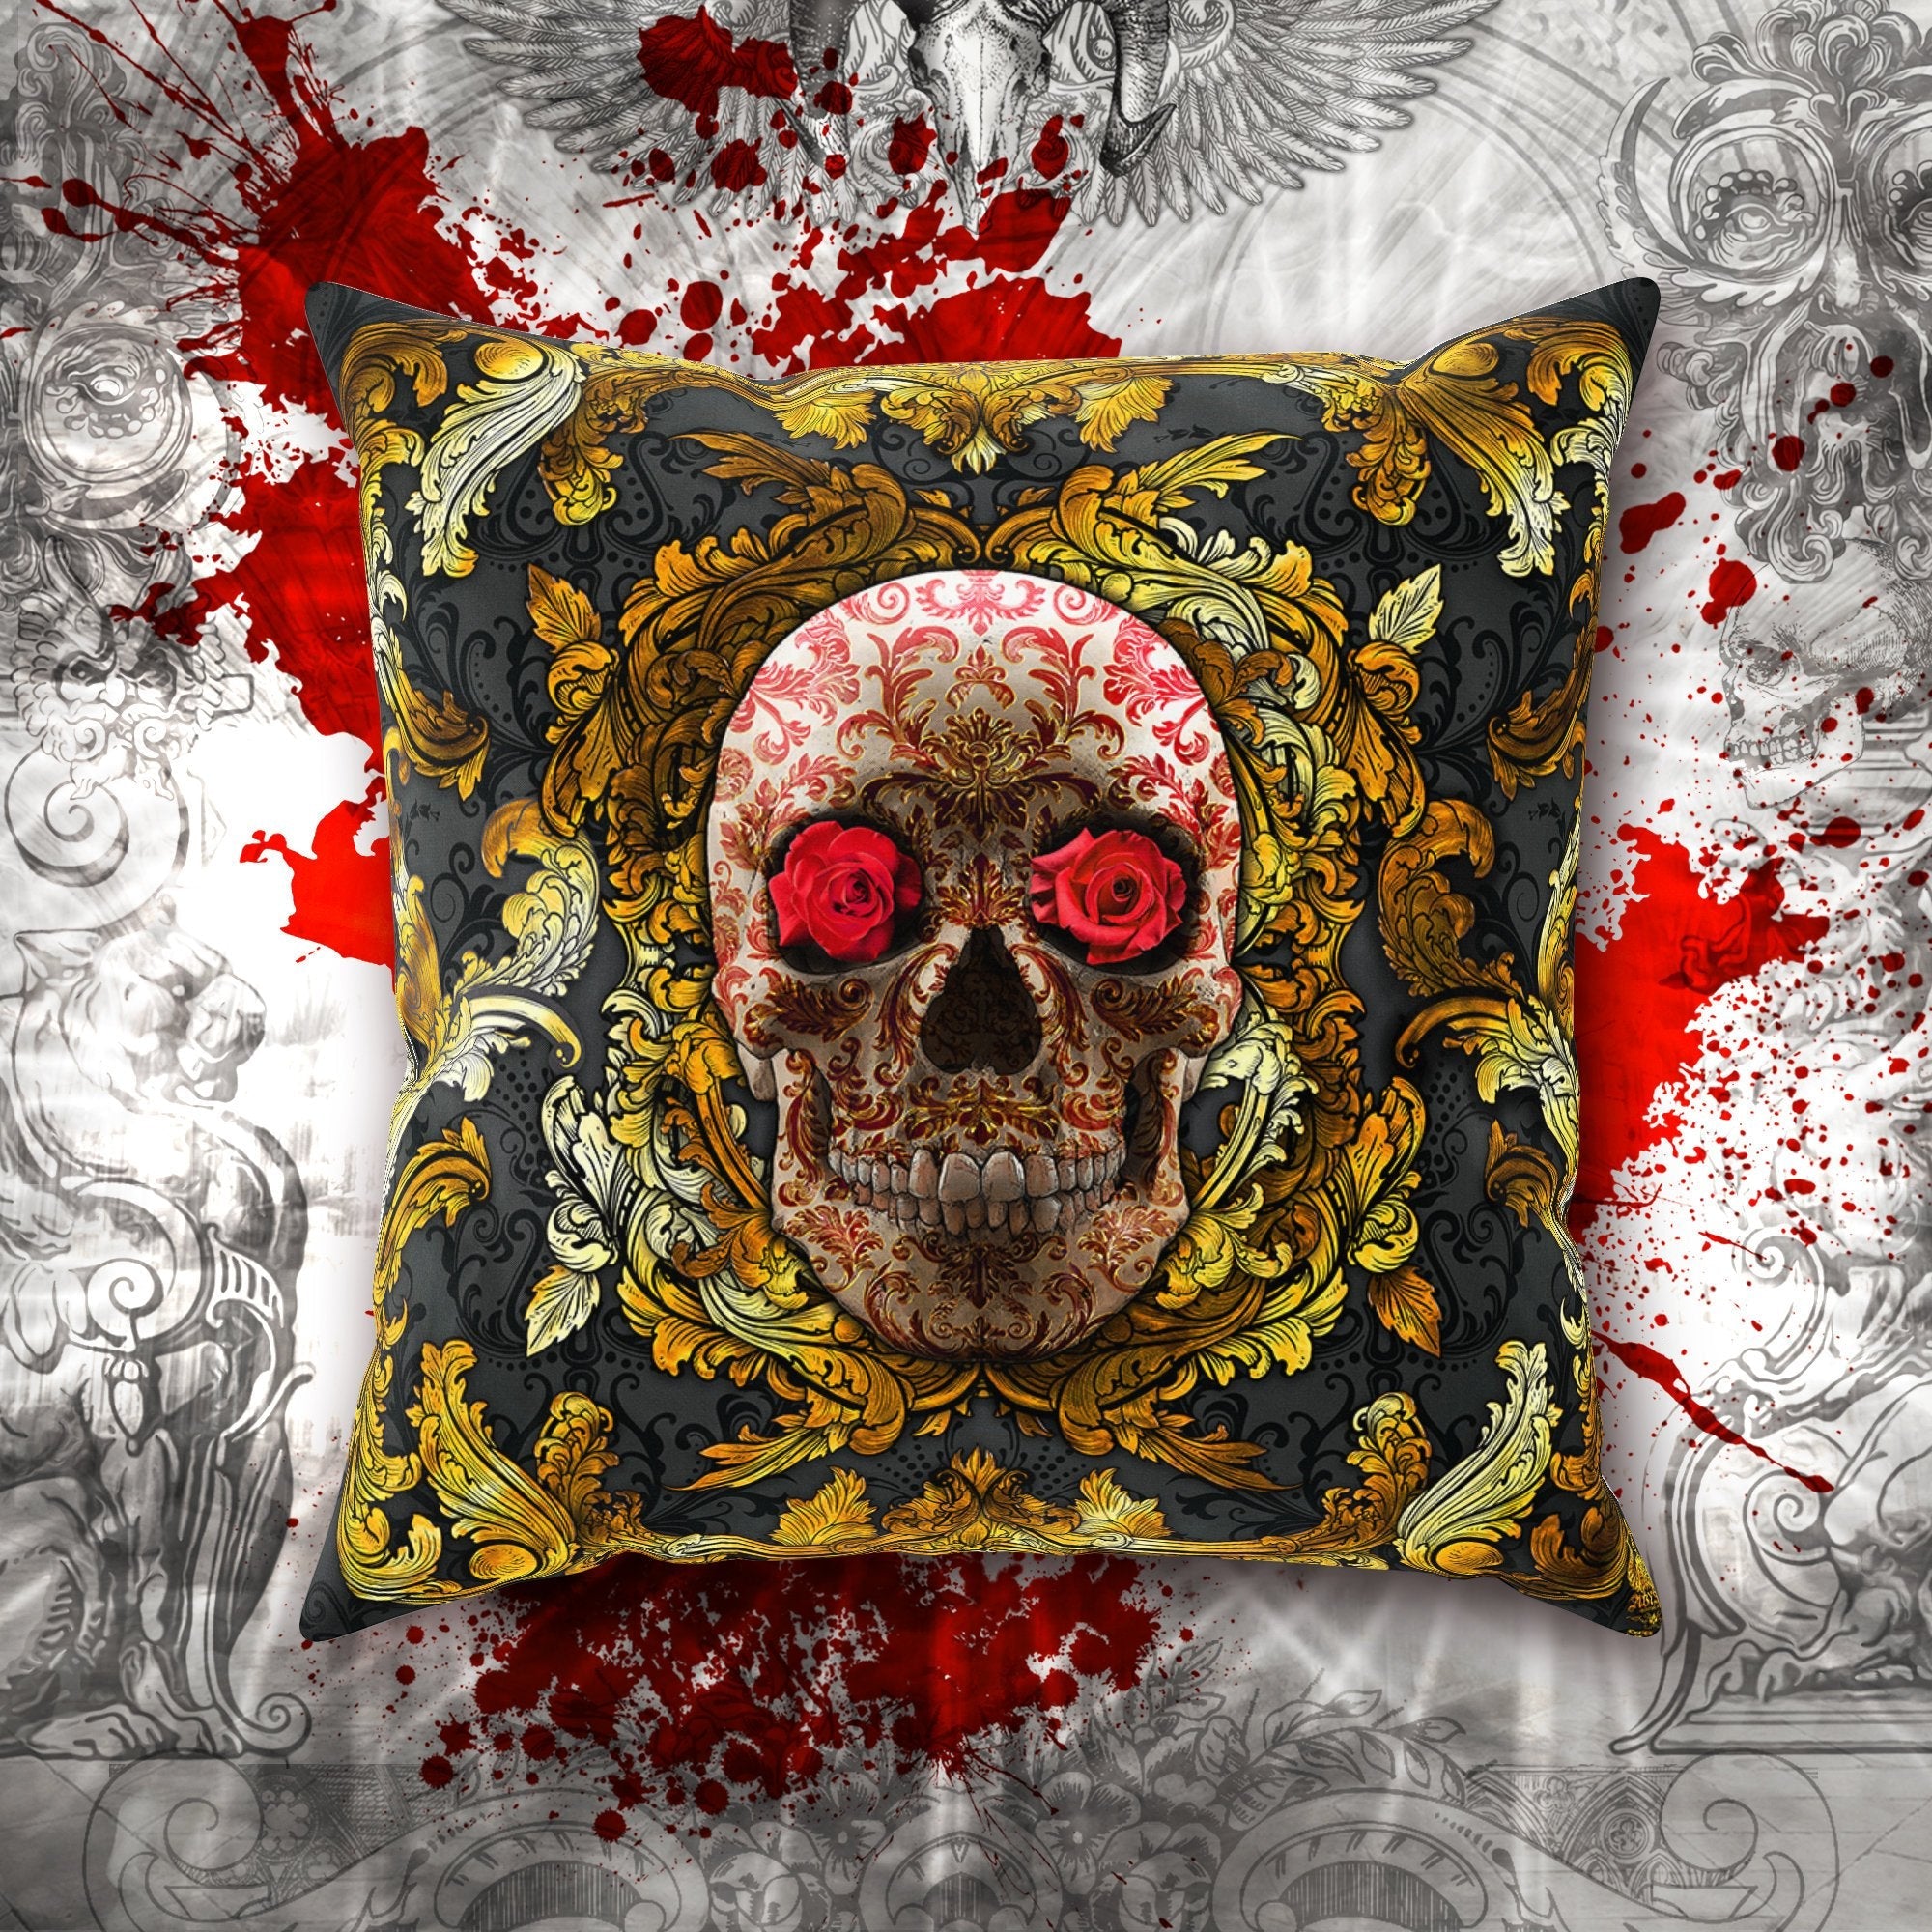 Skull Throw Pillow, Decorative Accent Cushion, Baroque, Vintage Decor, Macabre Art, Alternative Home, Funky and Eclectic Decor - Gold & Red Roses - Abysm Internal